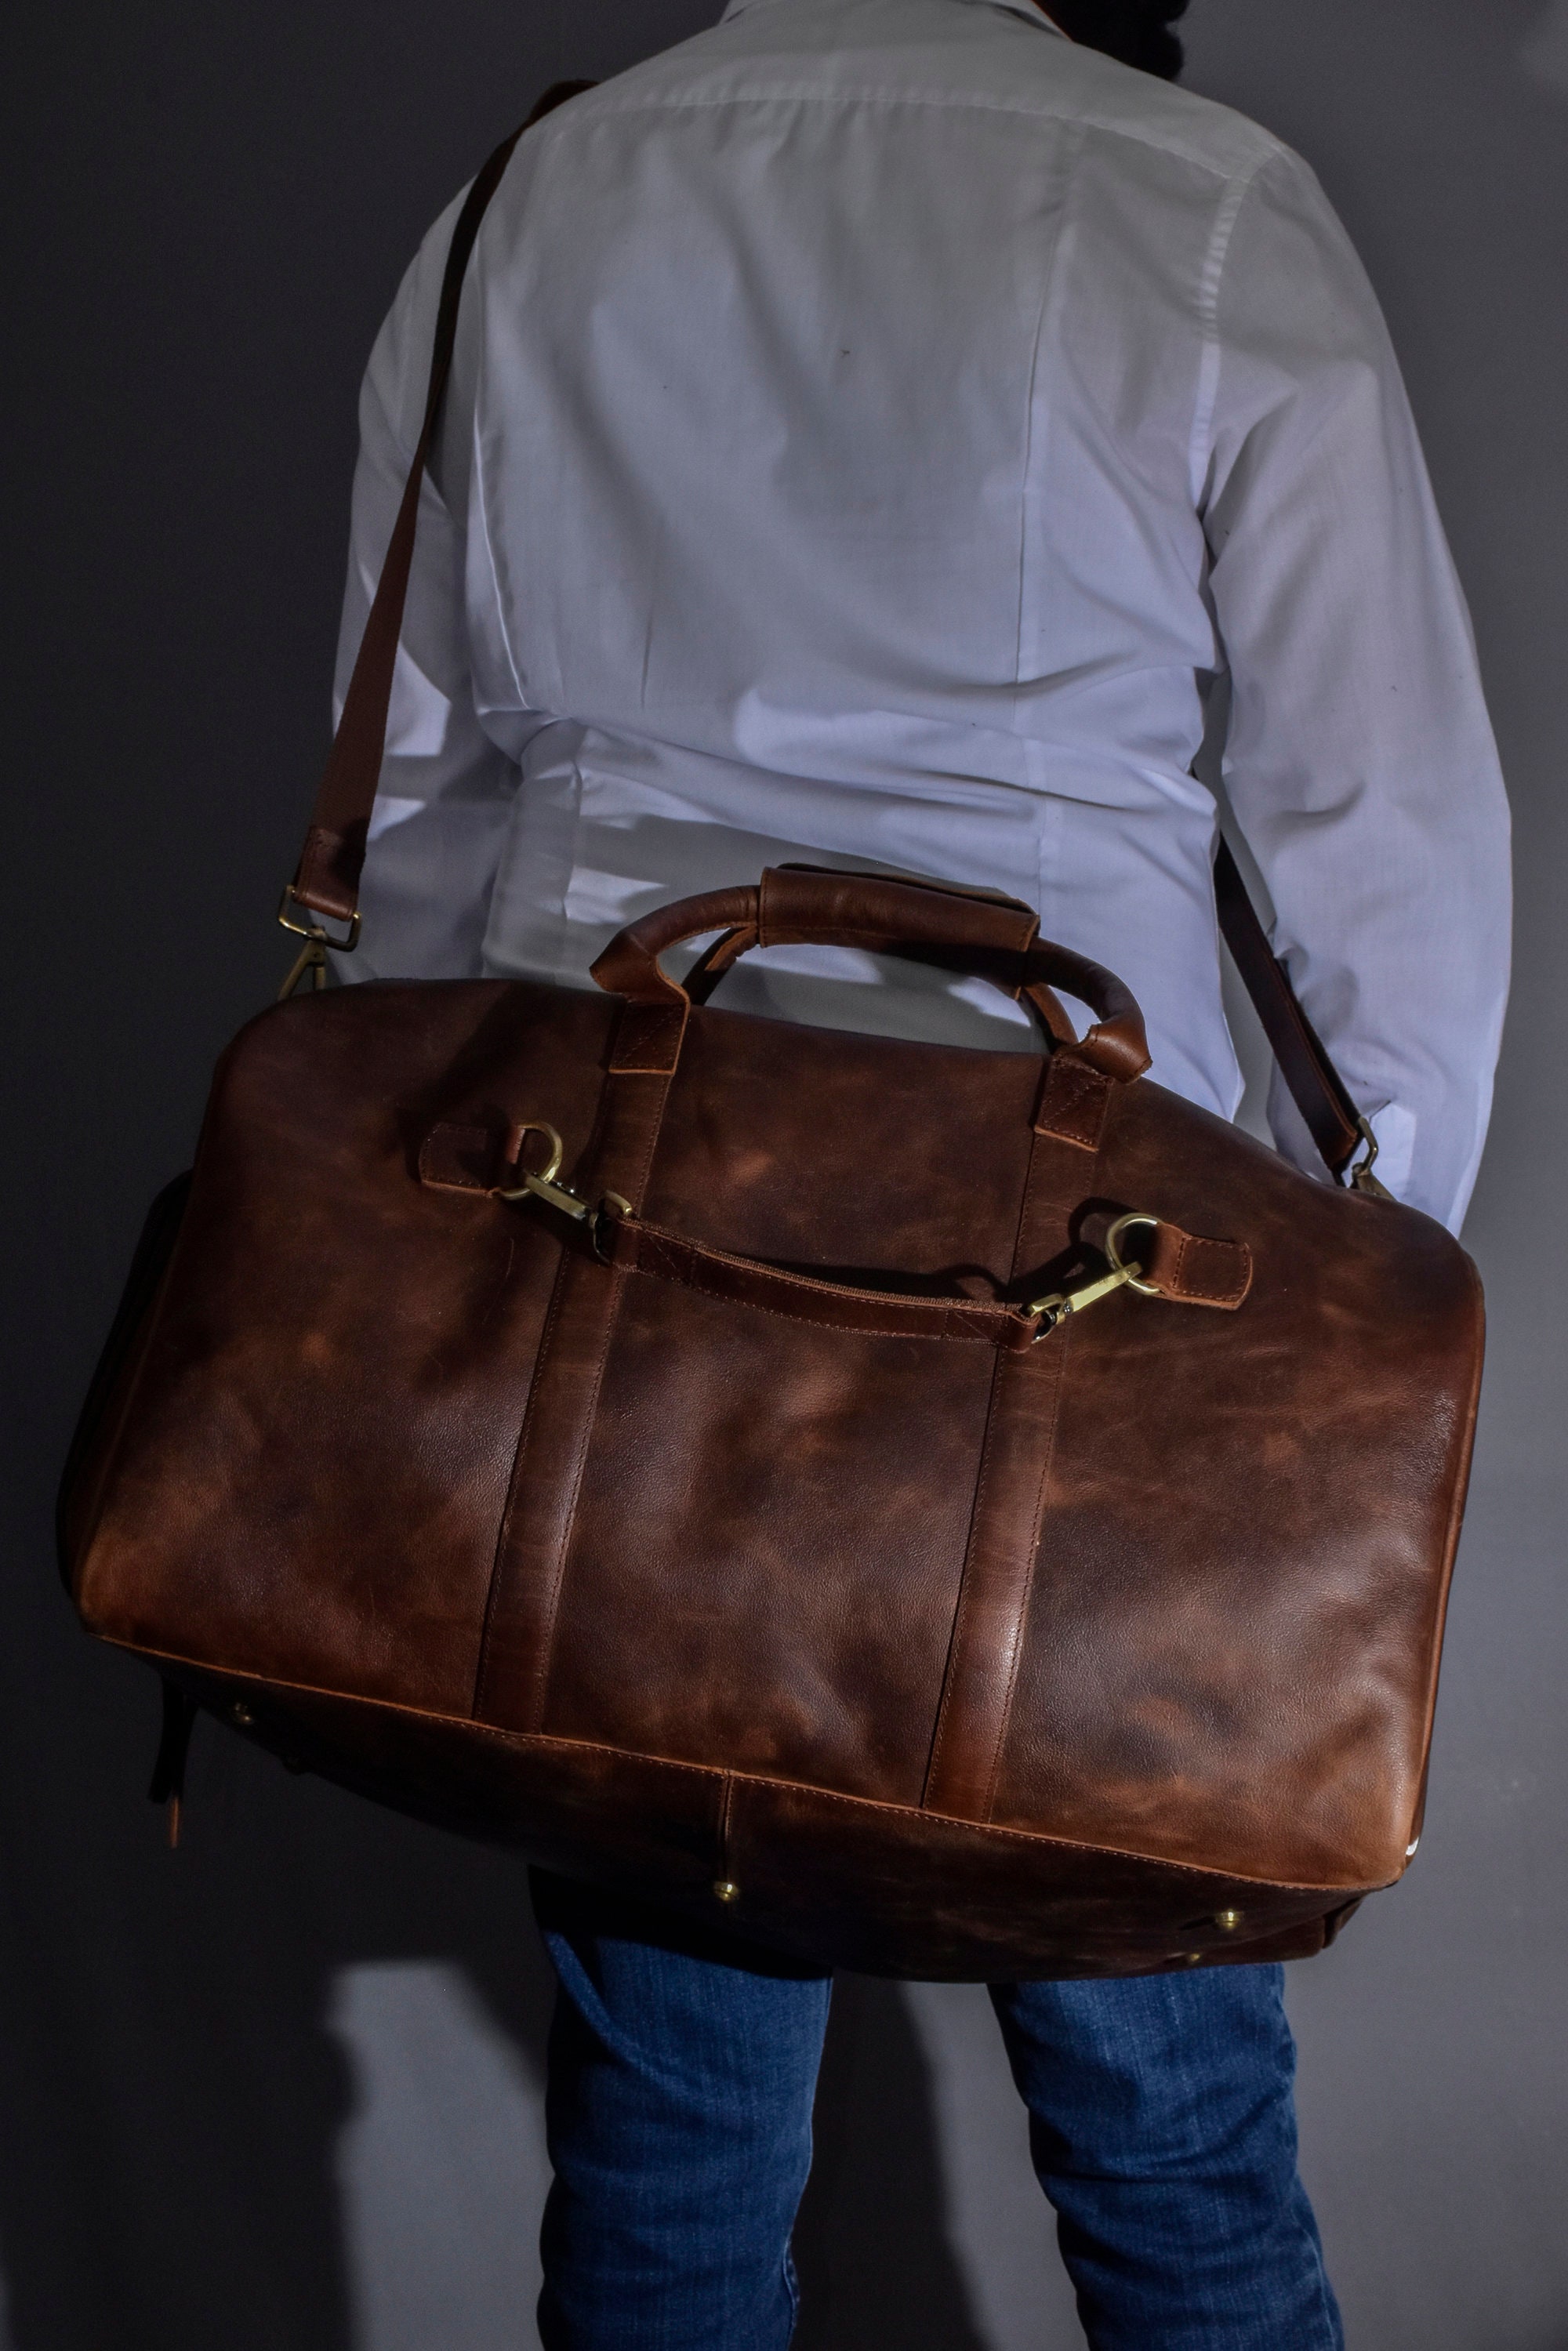 Where to Buy Textured Leather Duffel Bags for Men and Women